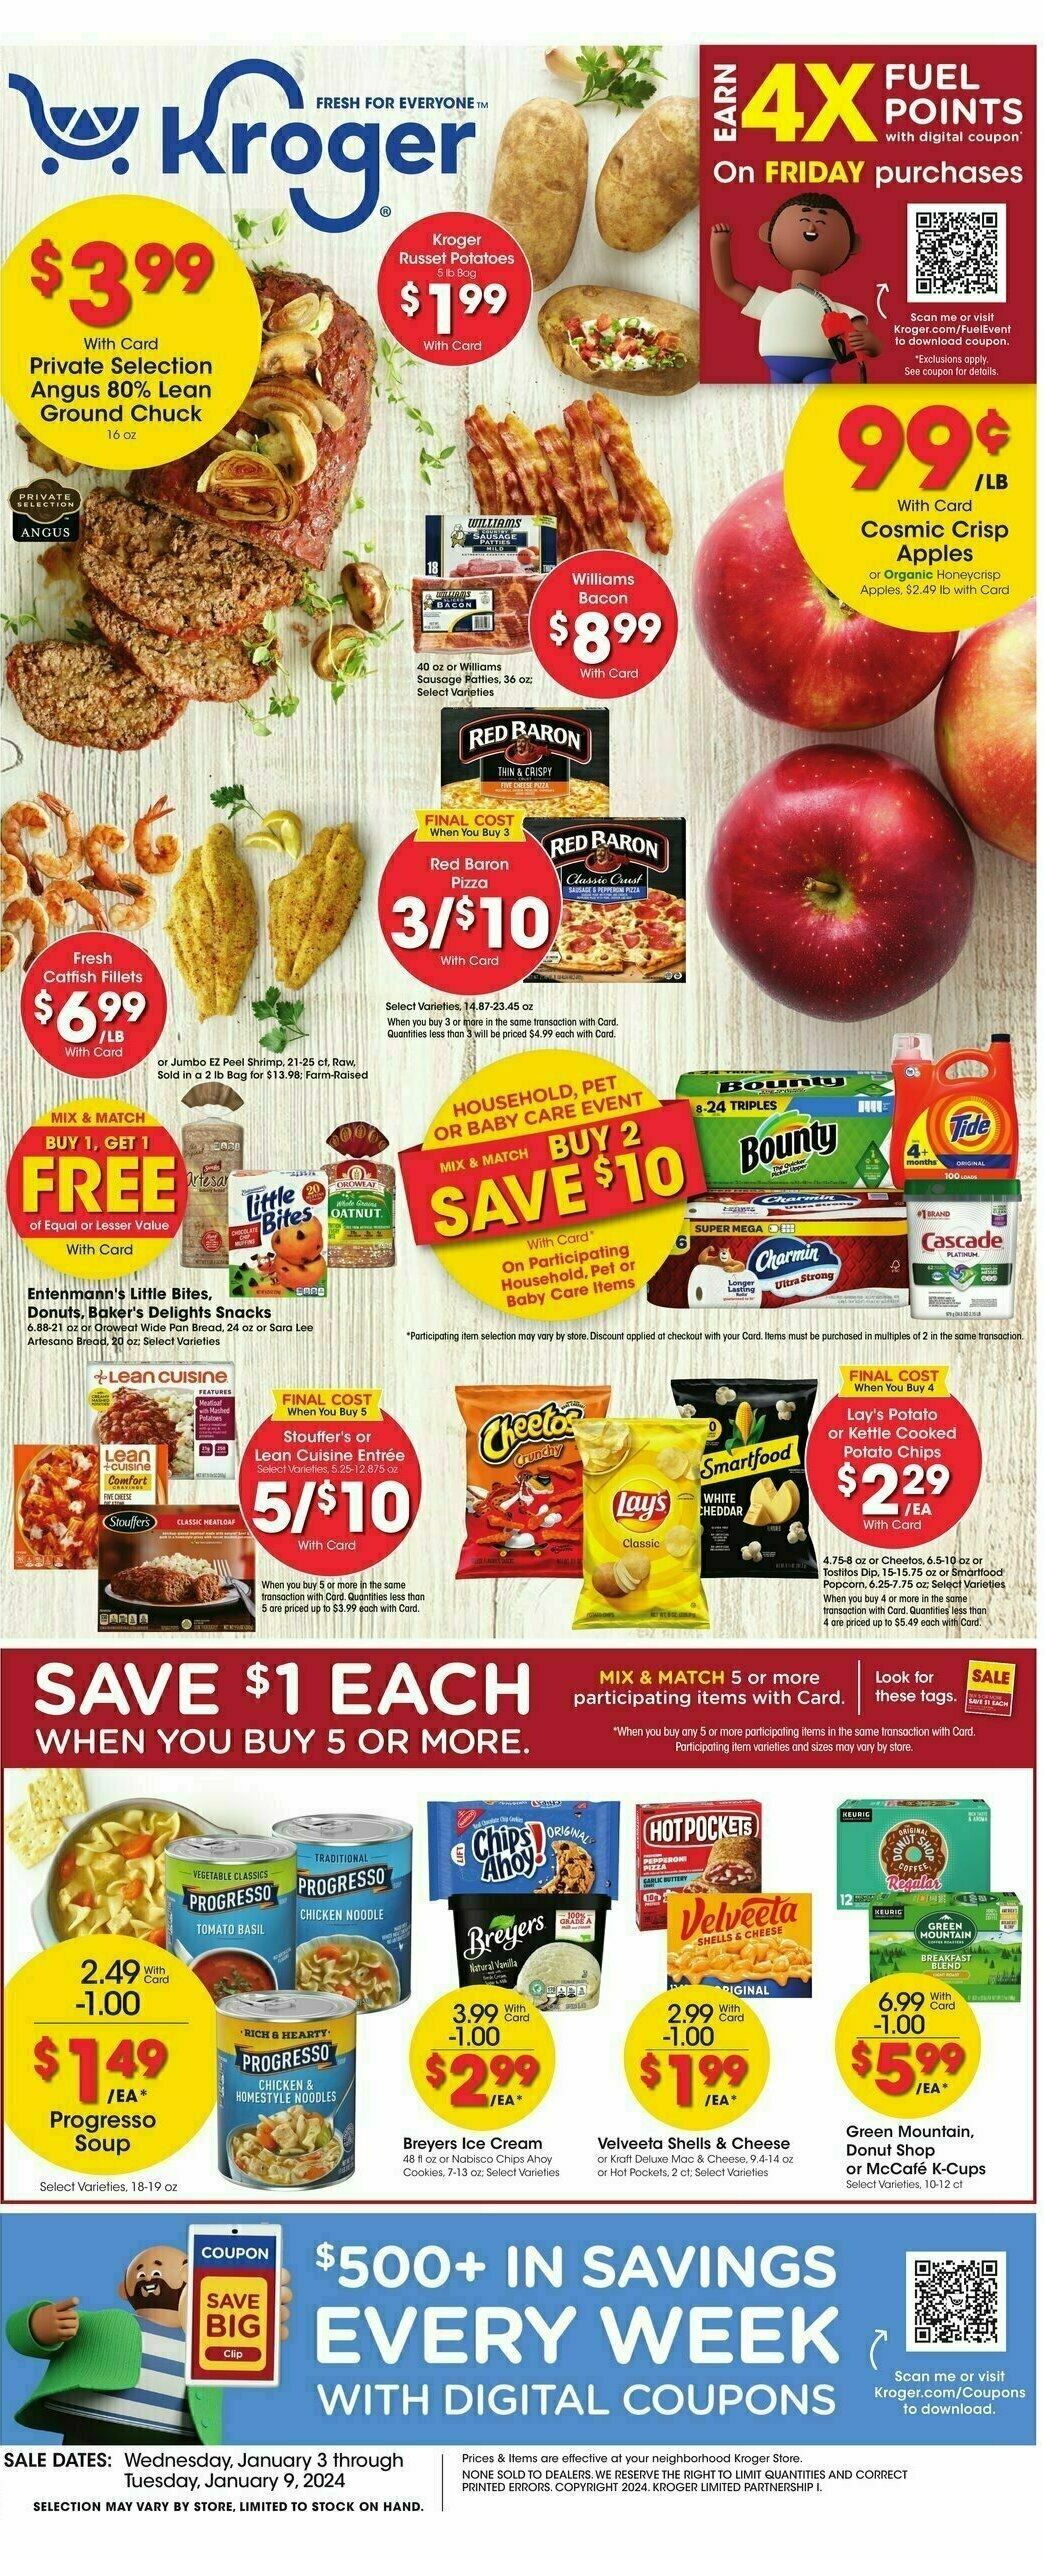 Kroger Weekly Ad from January 3